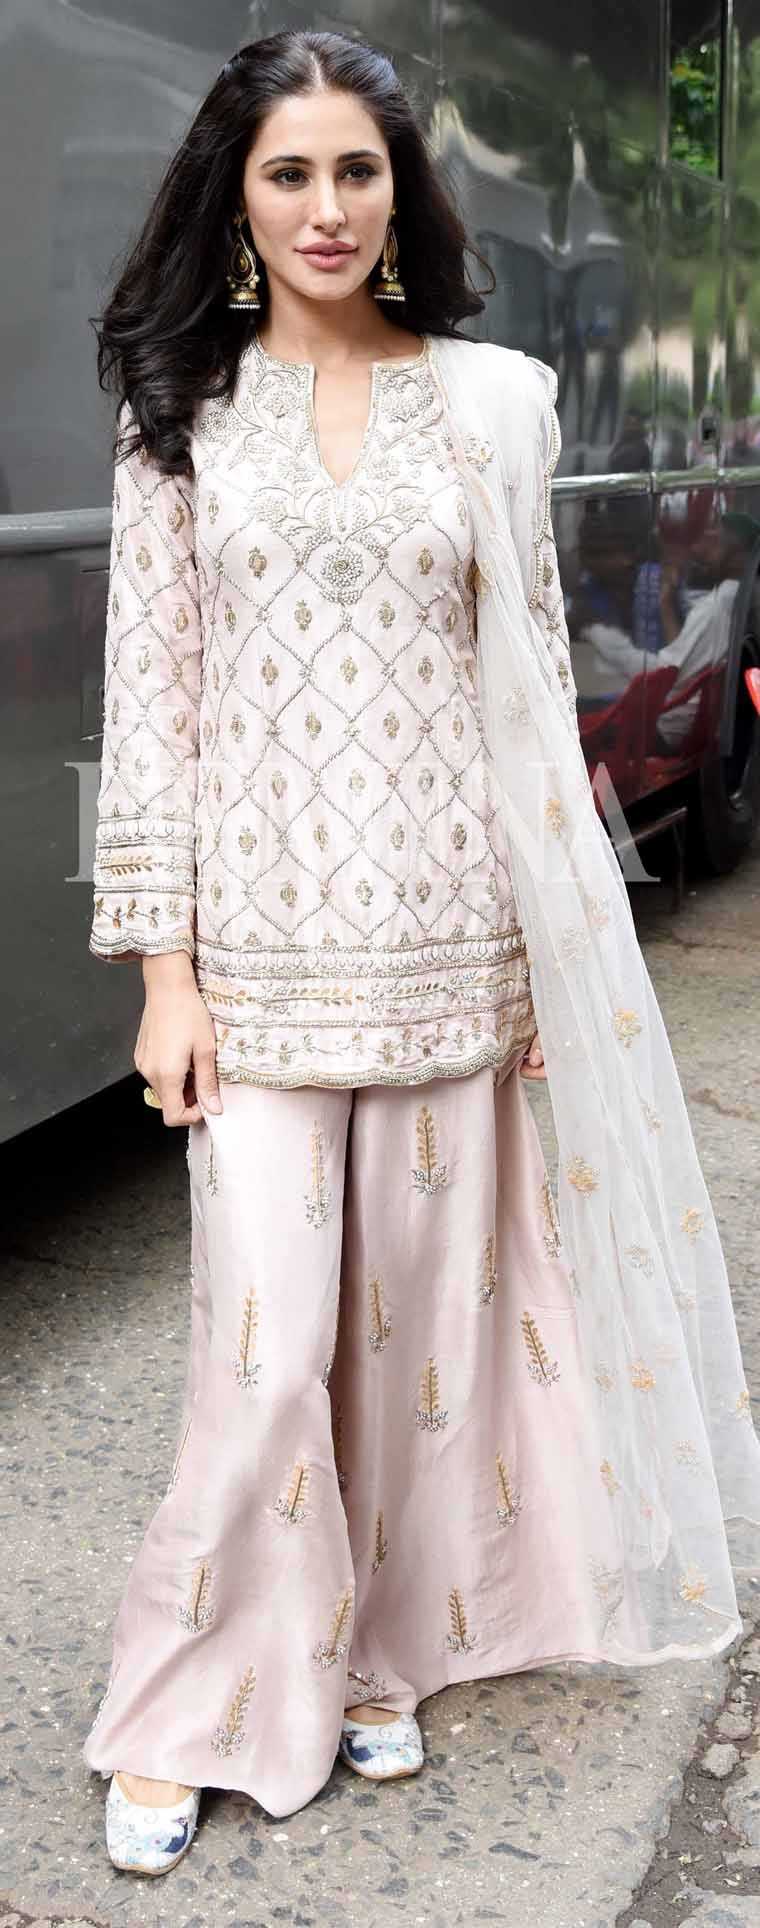 NARGIS FAKHRI: Another Payal Singhal number we spotted was this dusty pink sharara on Nargis Fakhri.